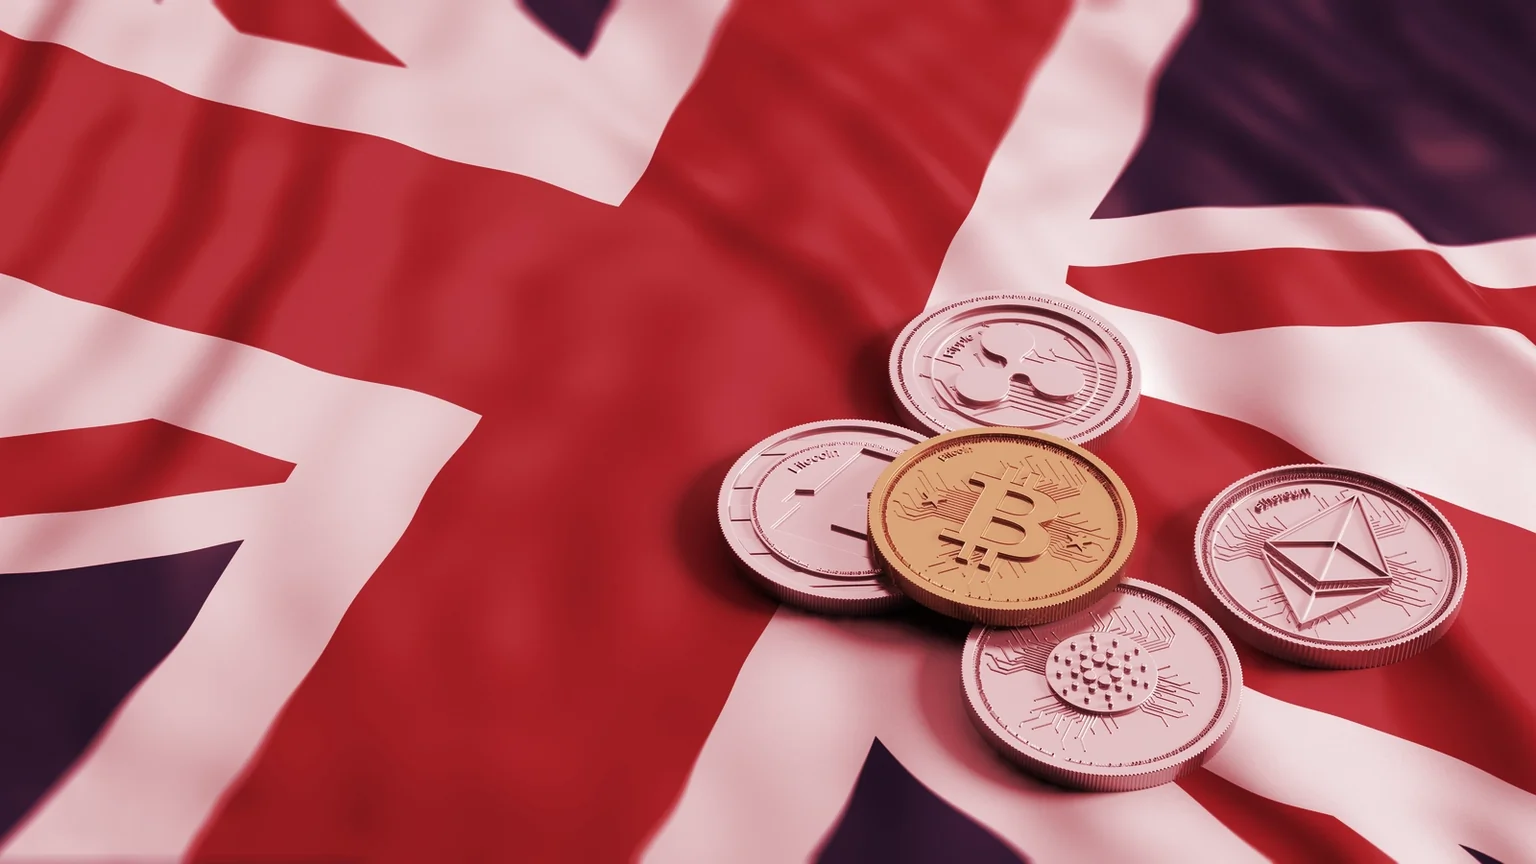 Binance UK will be regulated by the Financial Conduct Authority. Image: Shutterstock